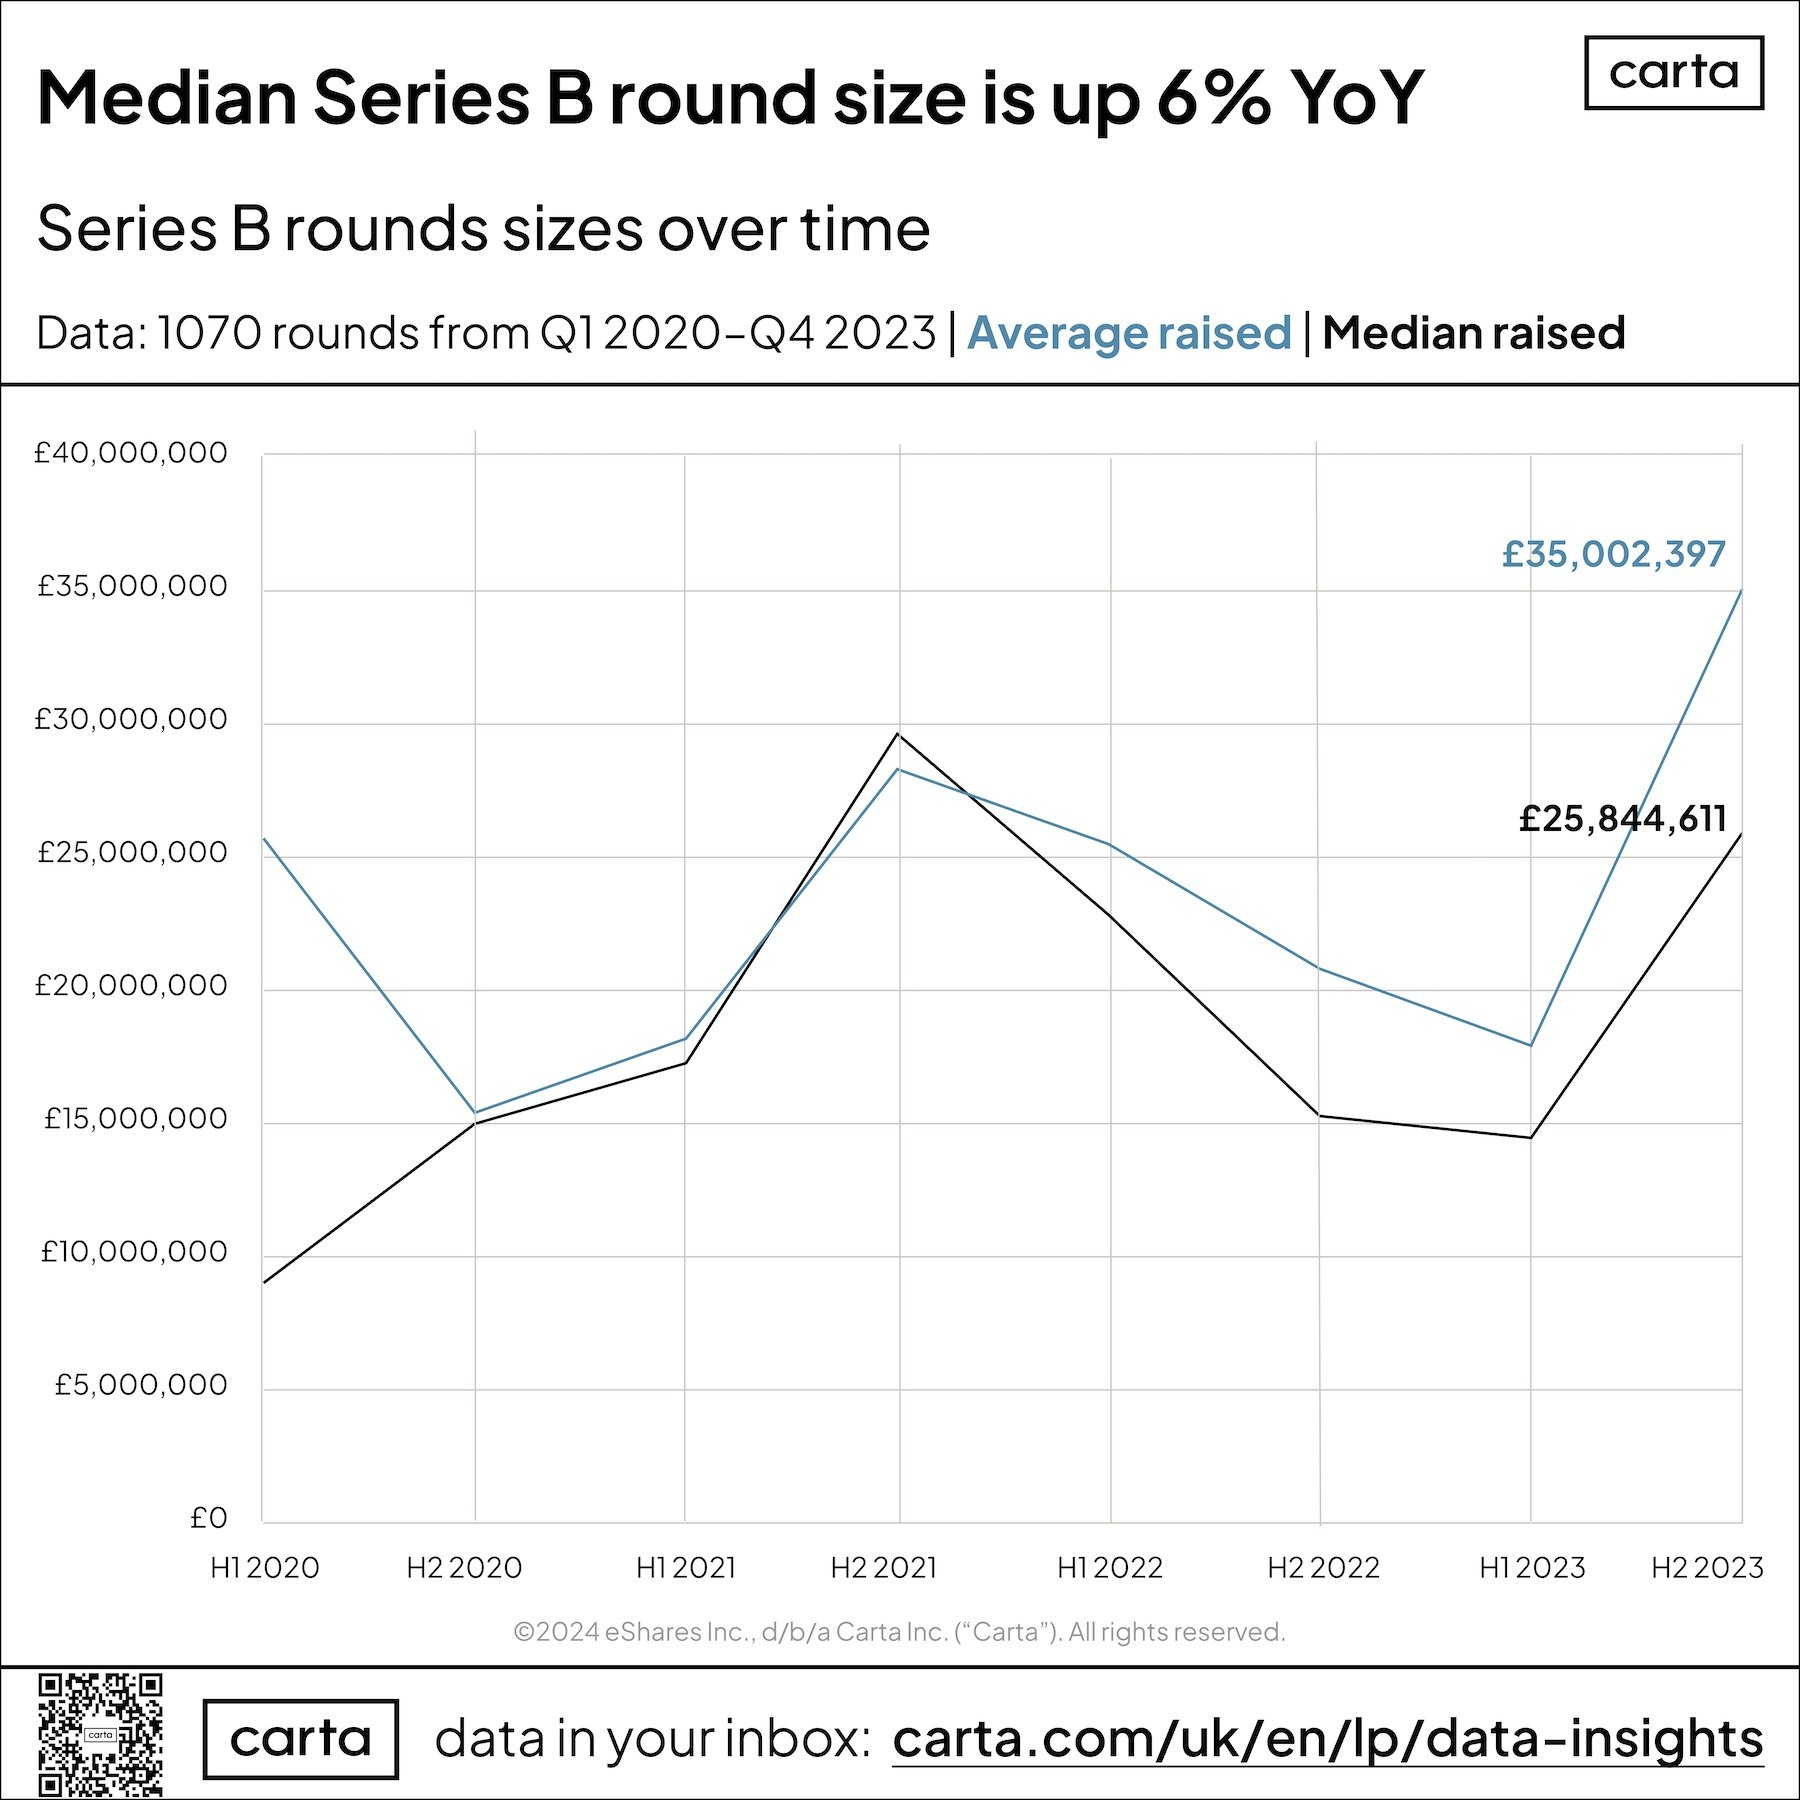 A chart from Carta showing the median and average Series B round size from 2020 to 2023. 